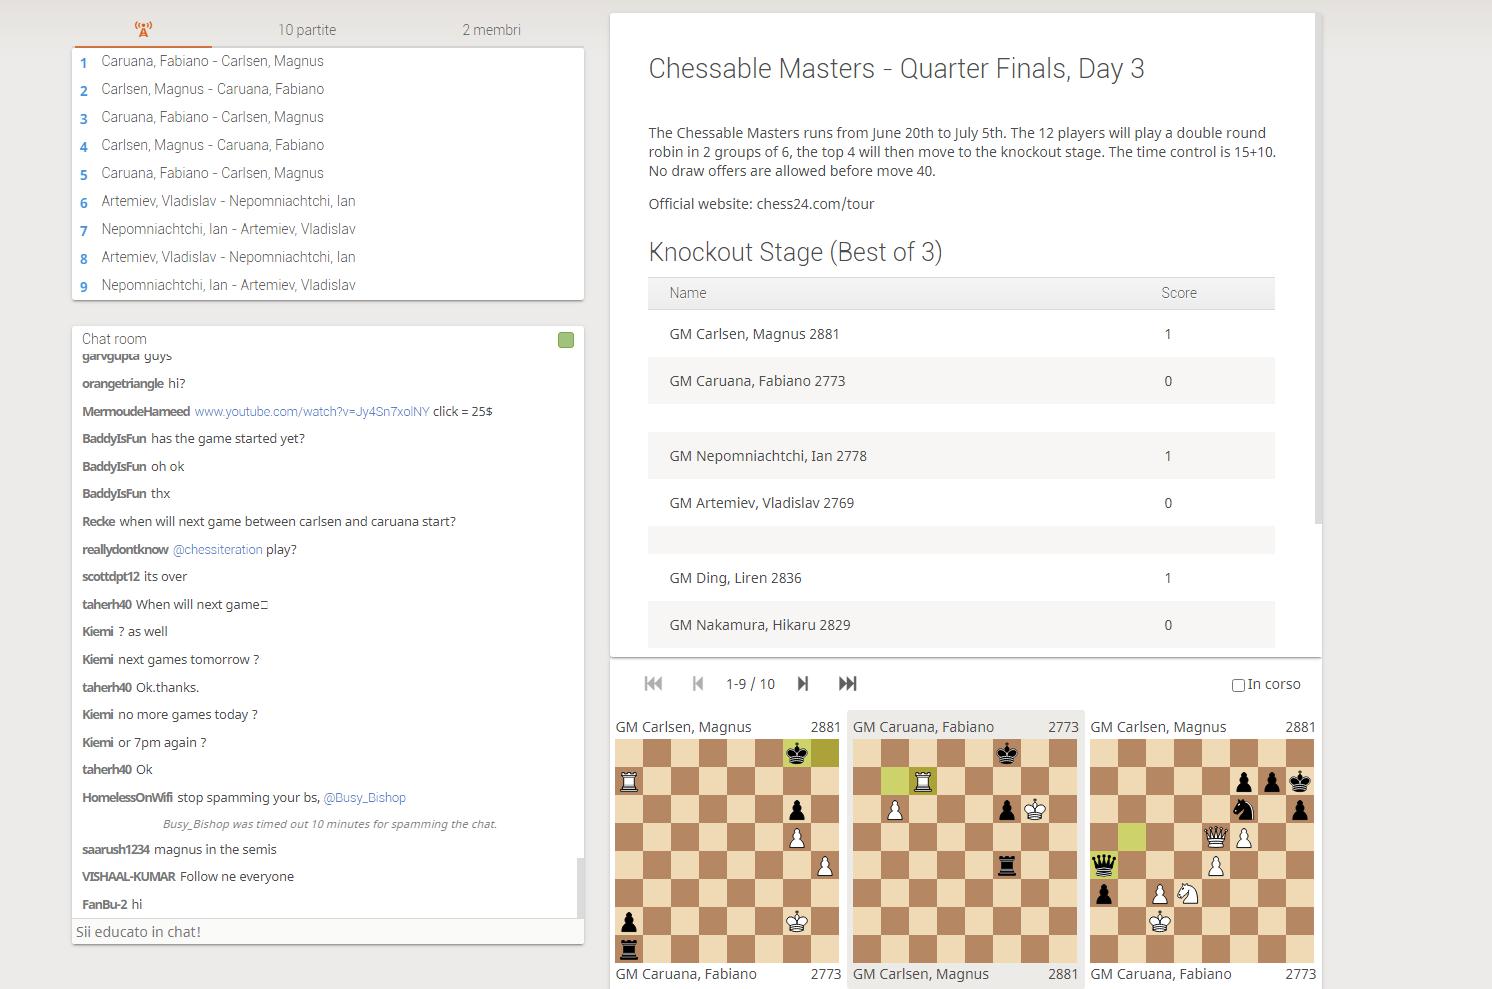 Photo of Chessable Masters - Quarter Finals, Day 3